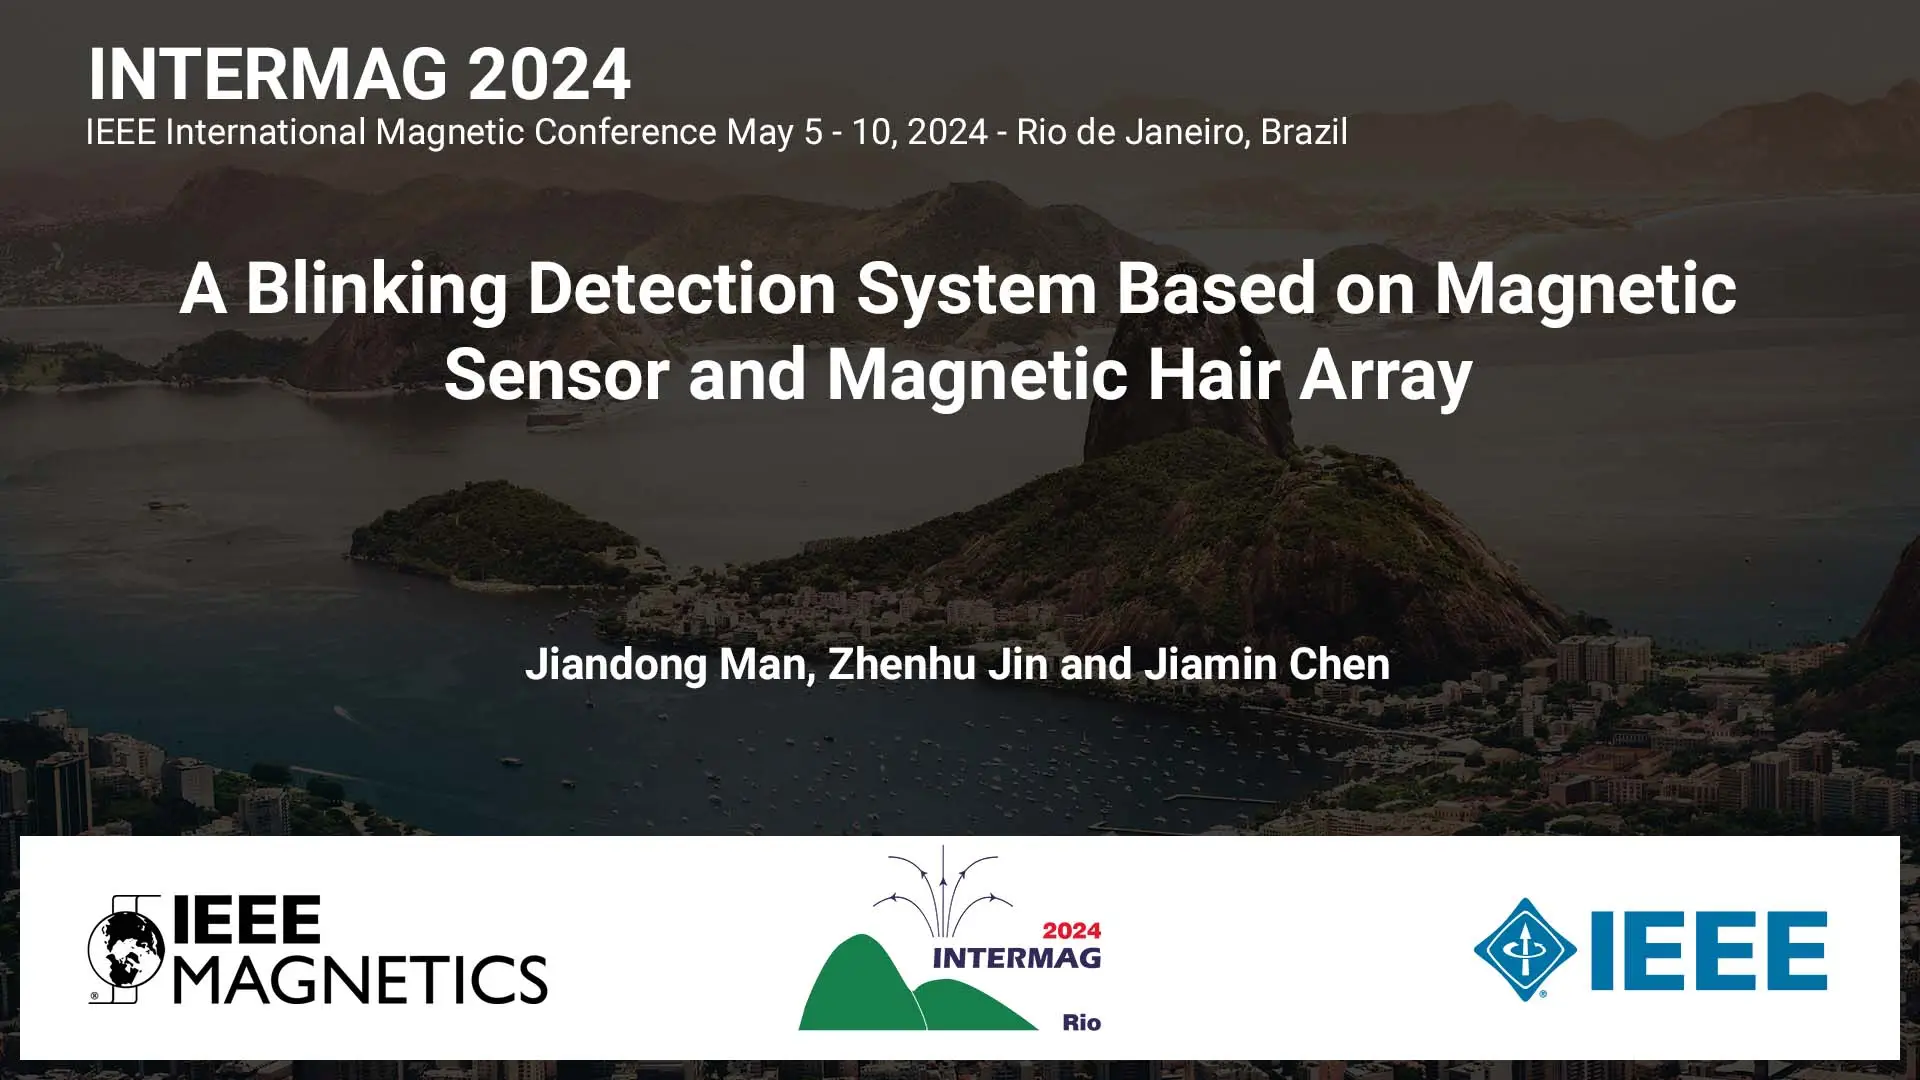 A Blinking Detection System Based on Magnetic Sensor and Magnetic Hair Array